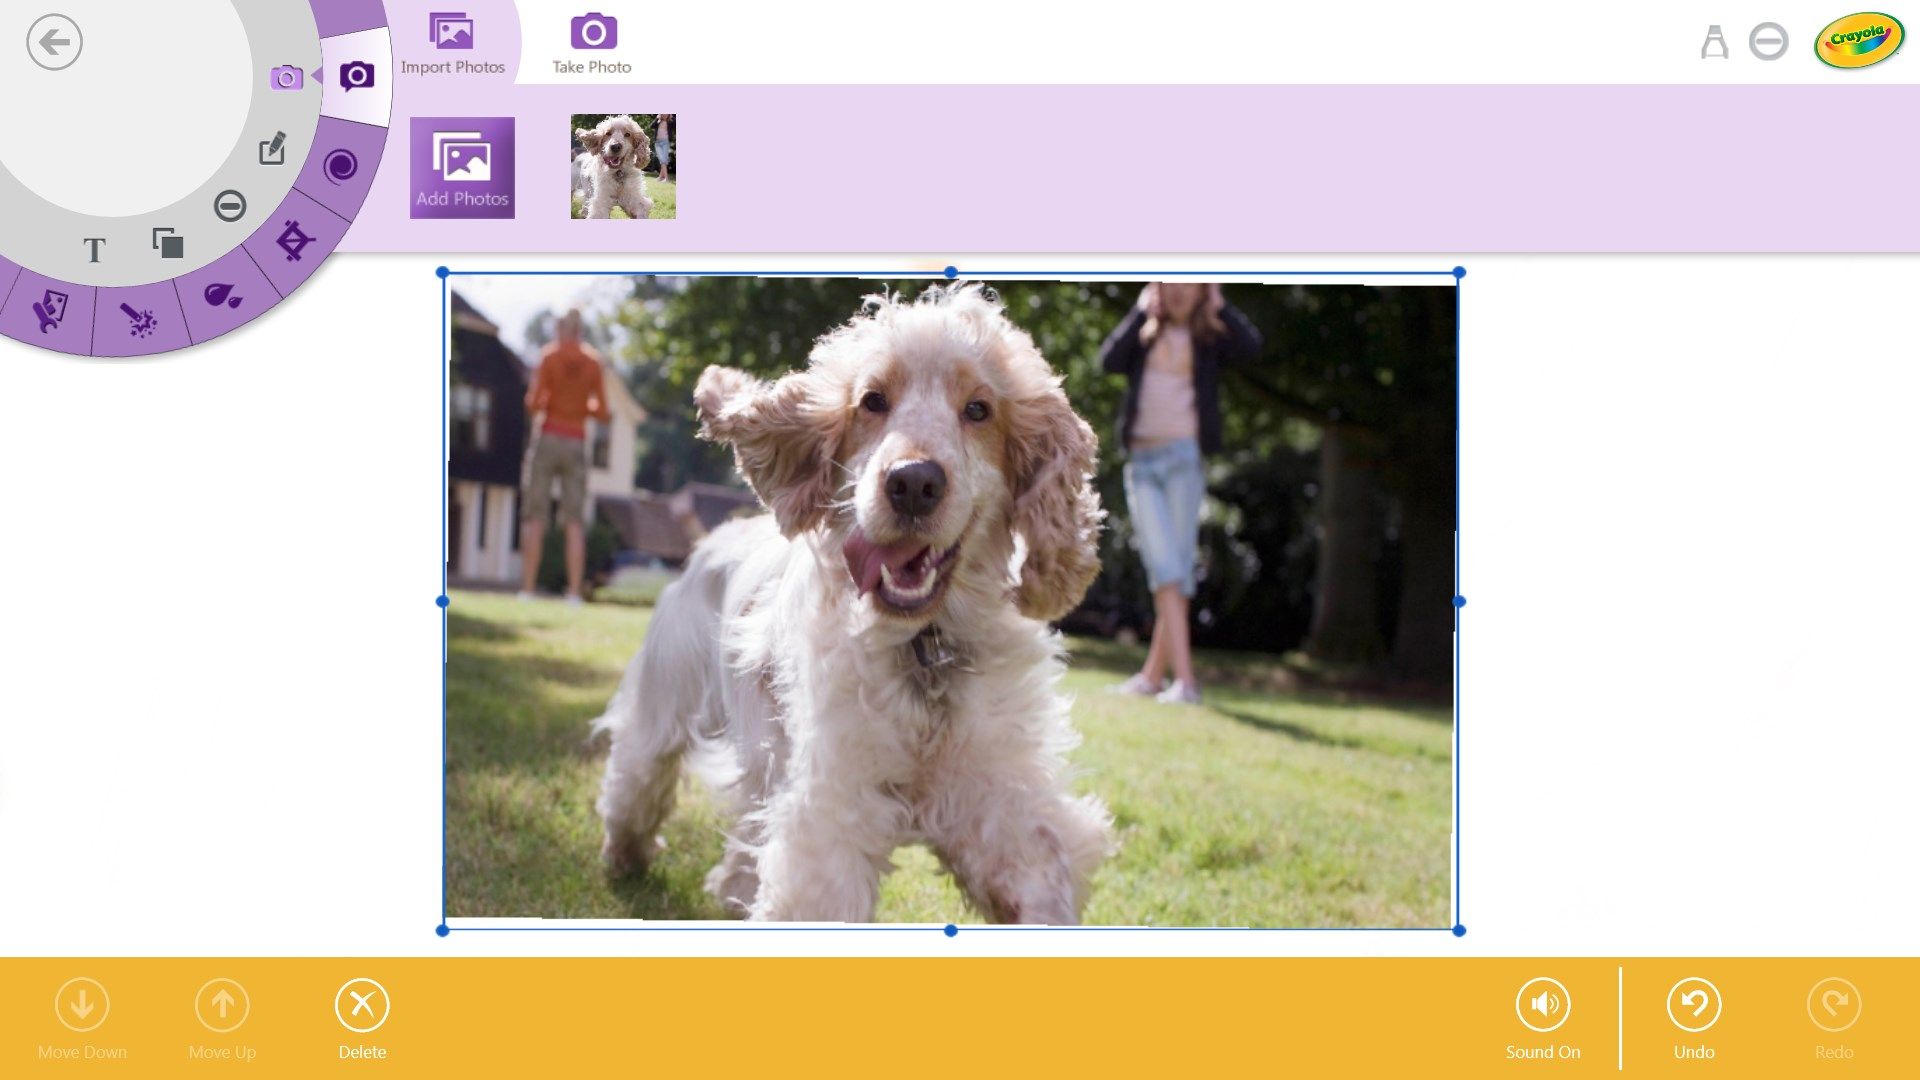 Import photos from your image gallery or click a photo from your device camera